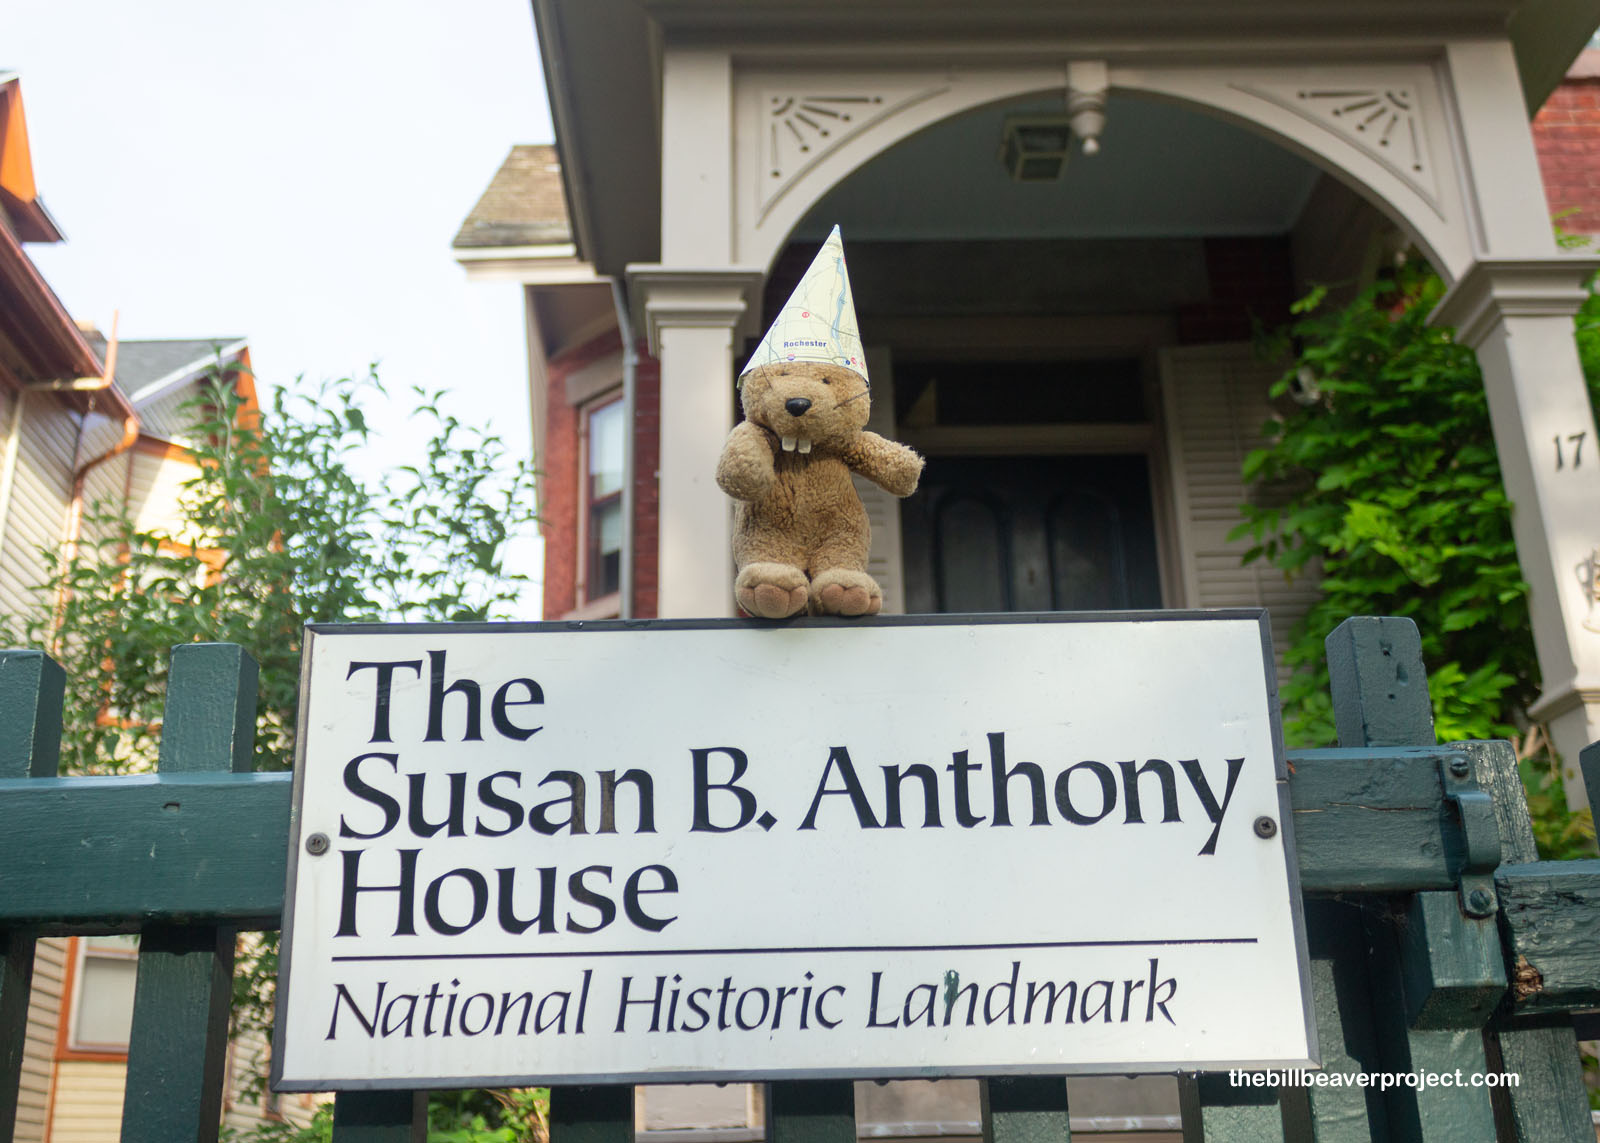 The Susan B. Anthony House